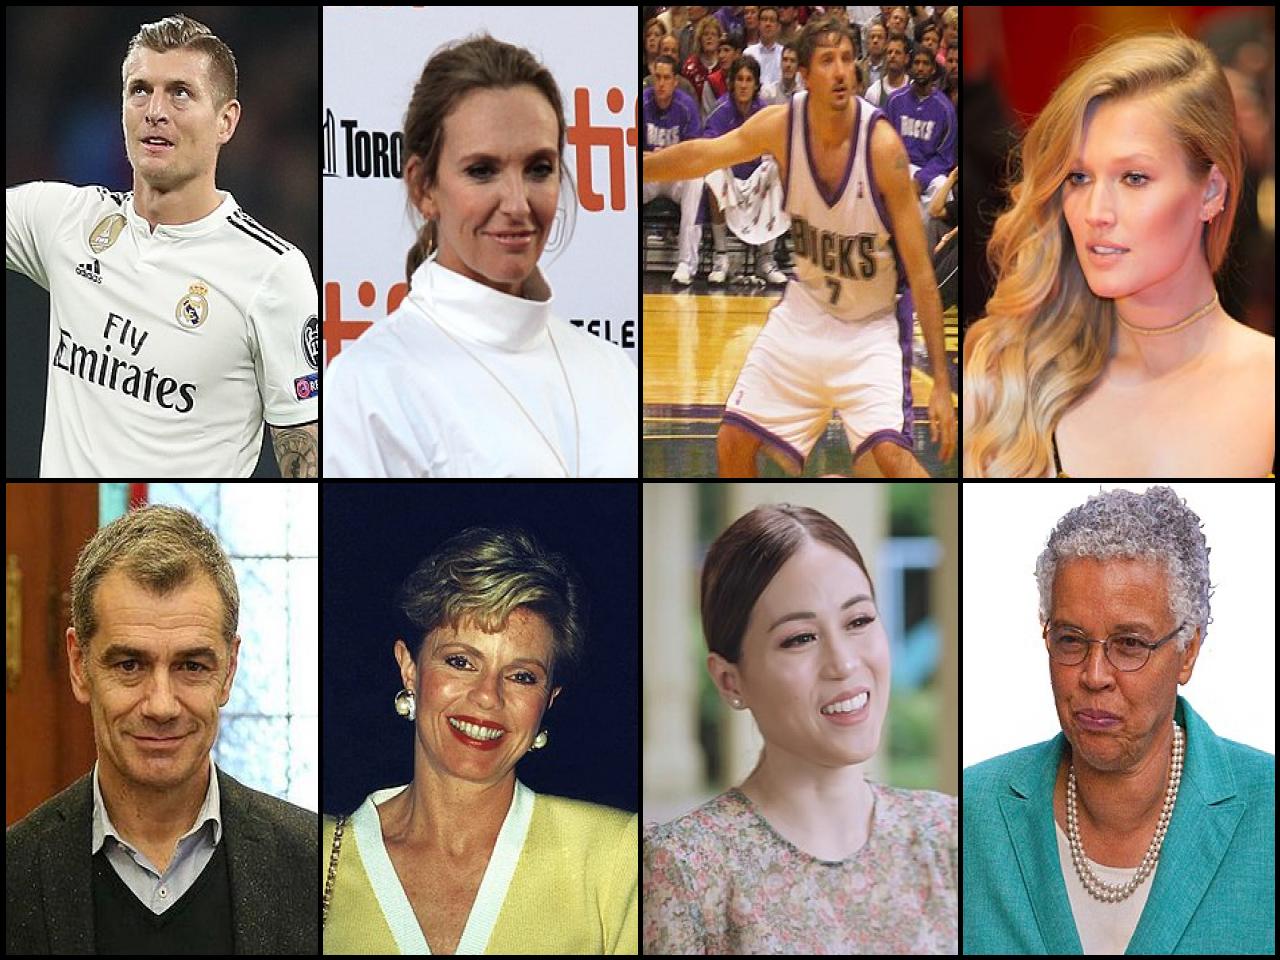 Famous People with name Toni